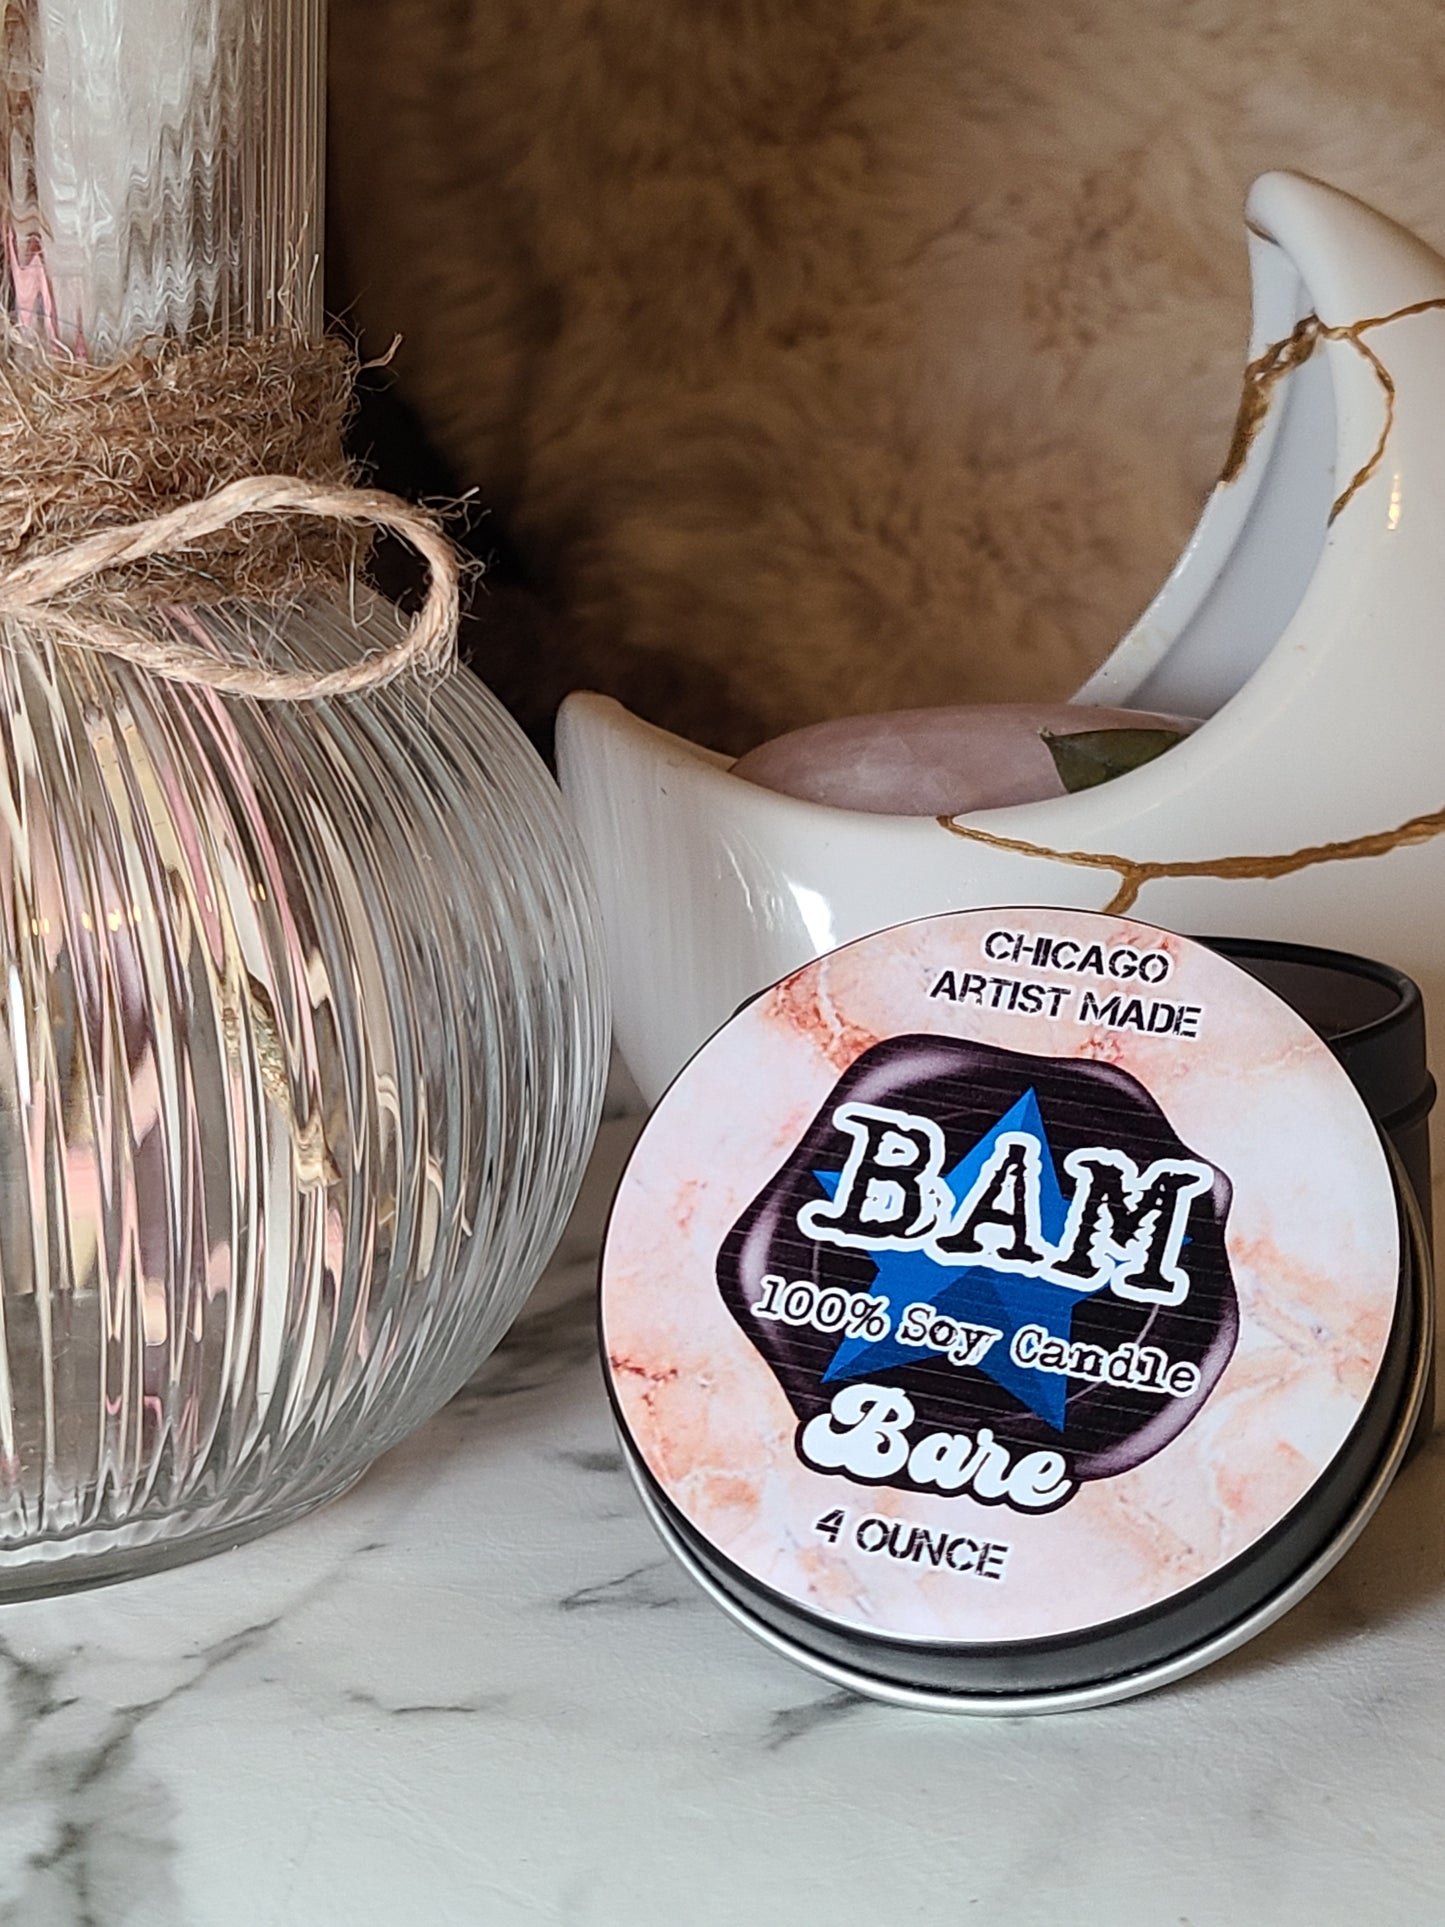 "BARE" *BAM* SOY CANDLE